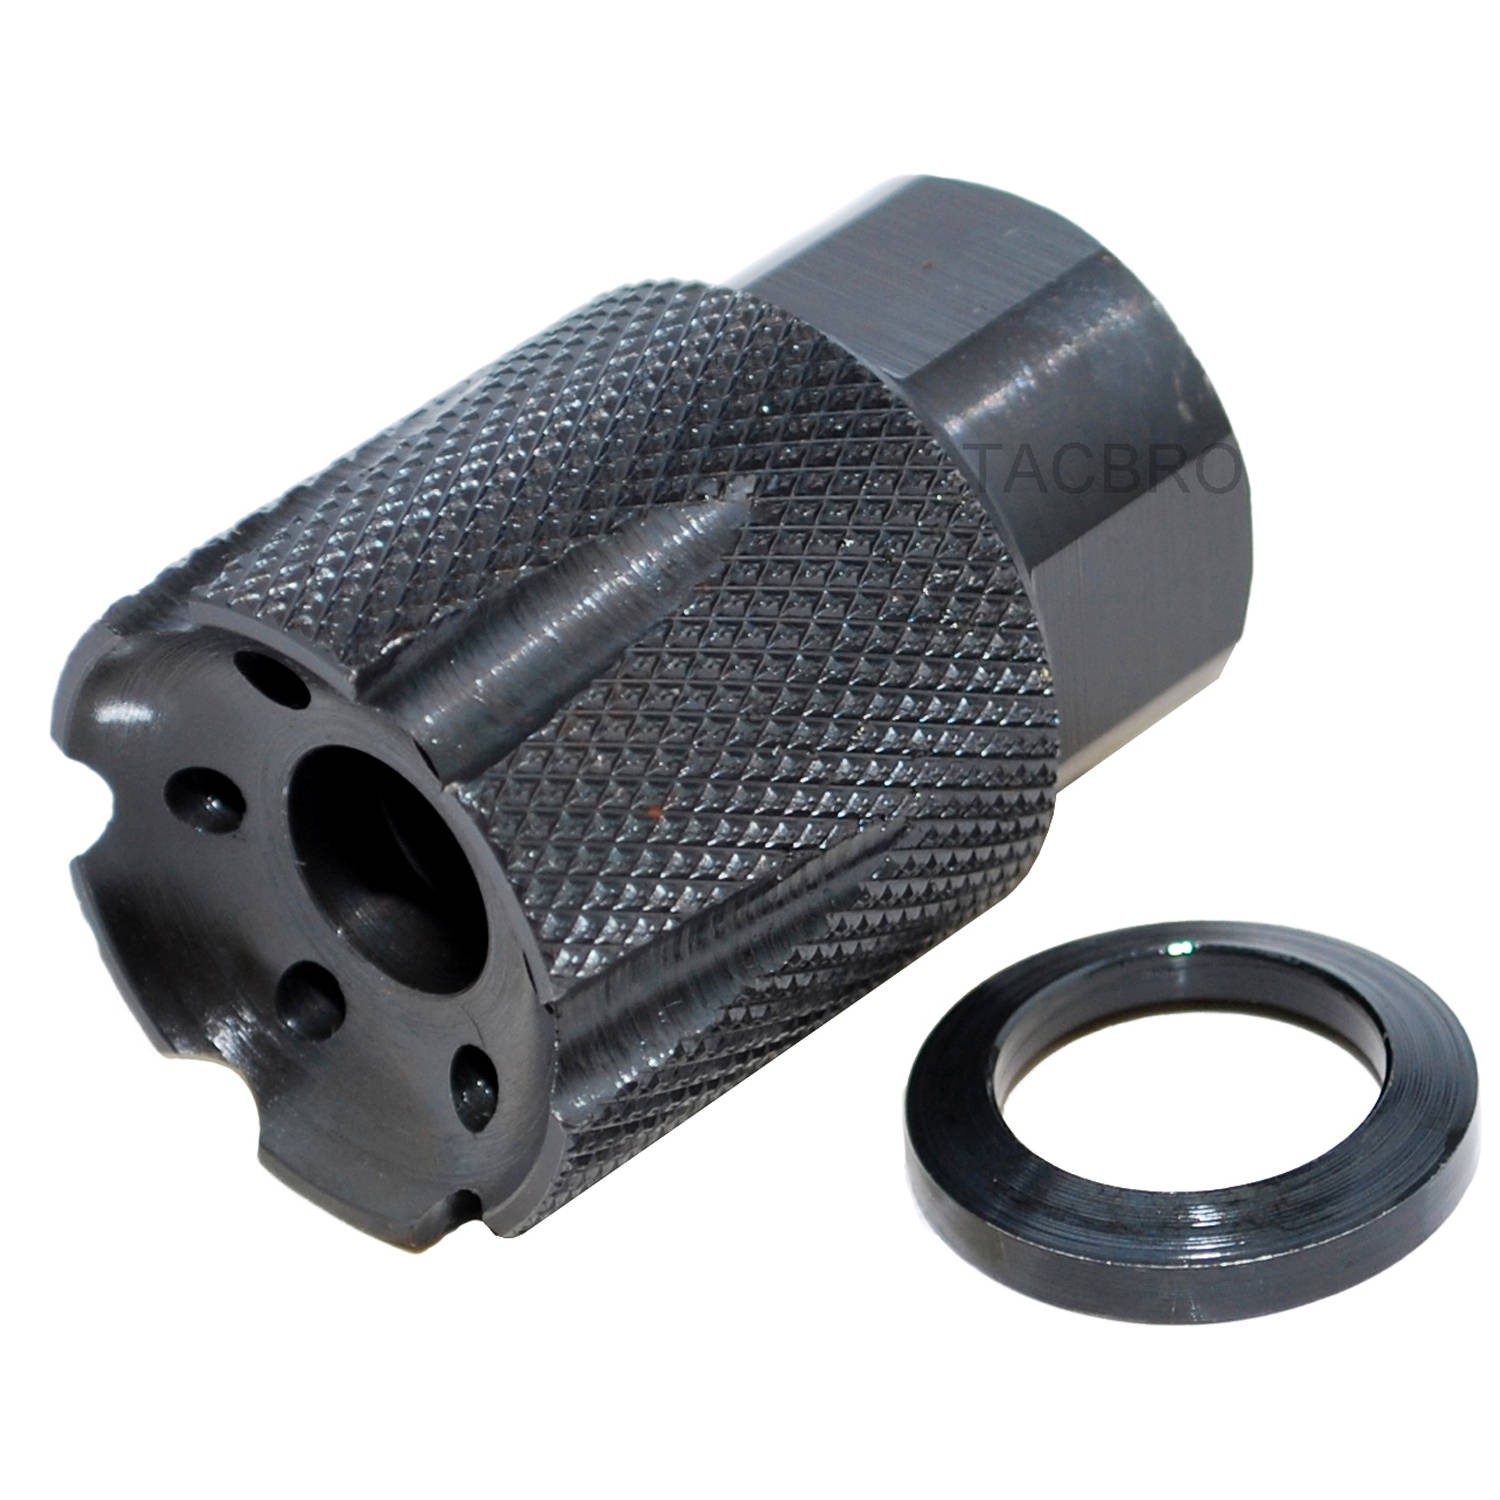 Muzzle Brake 1/2x28 TPI Low Concussion Compensator for .223/5.56 With Washer+Nut 